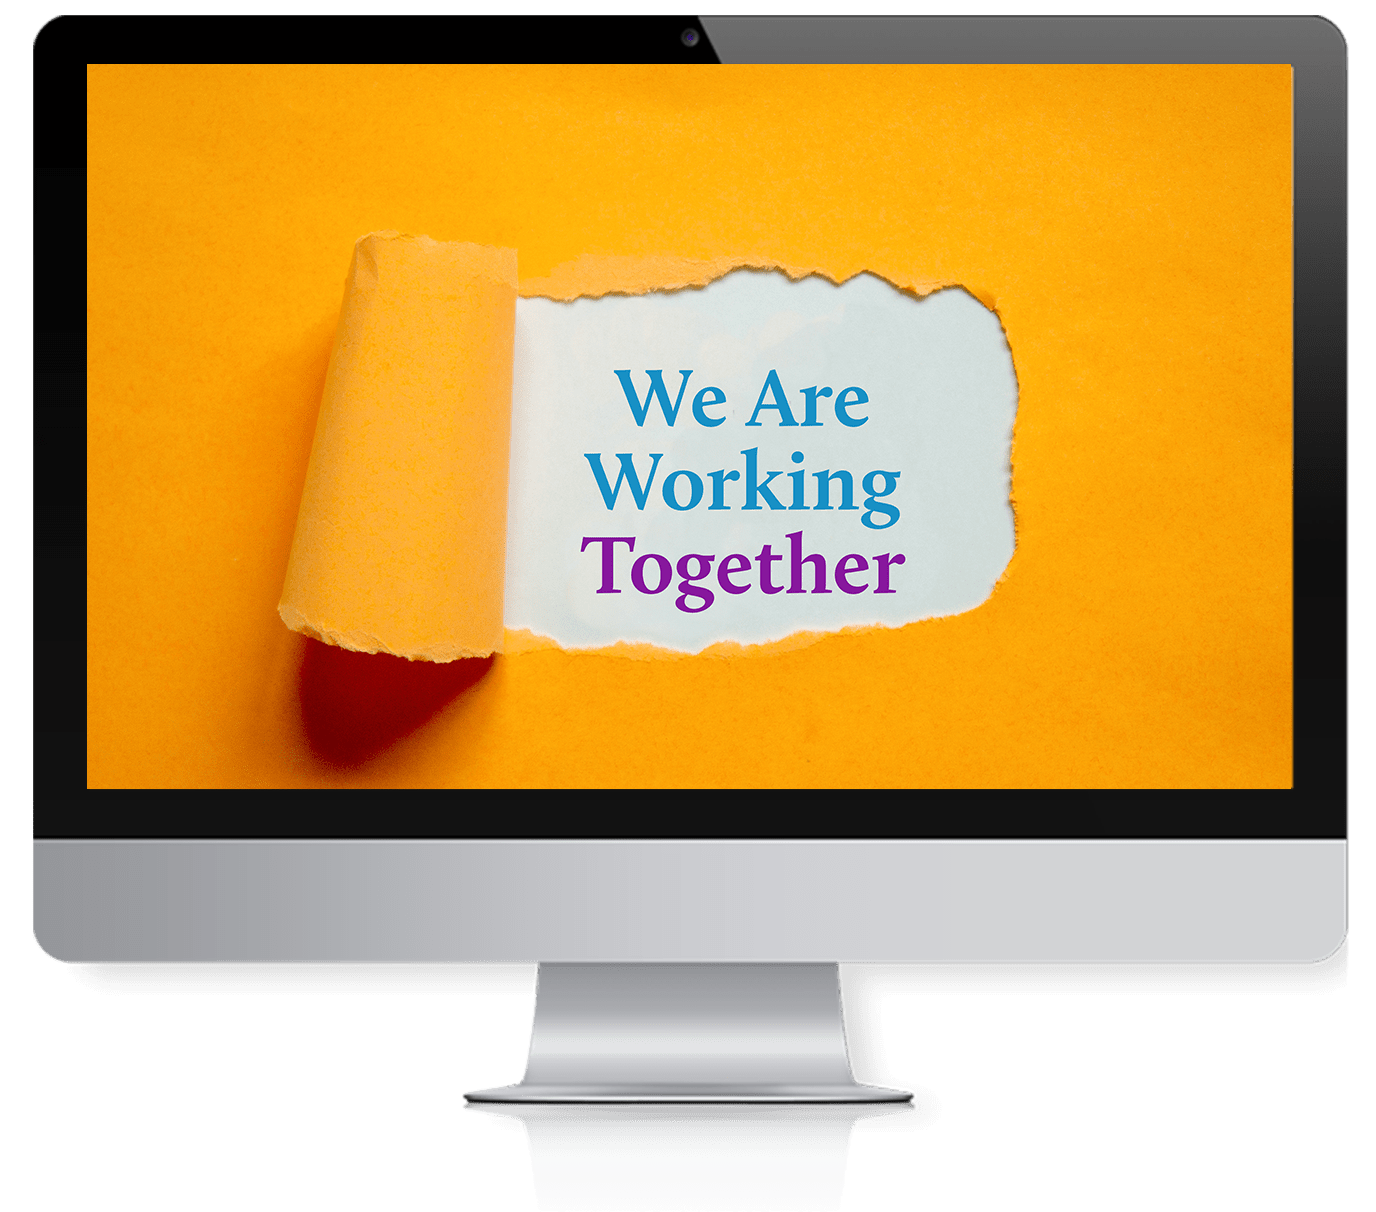 We Are Working Together in desktop